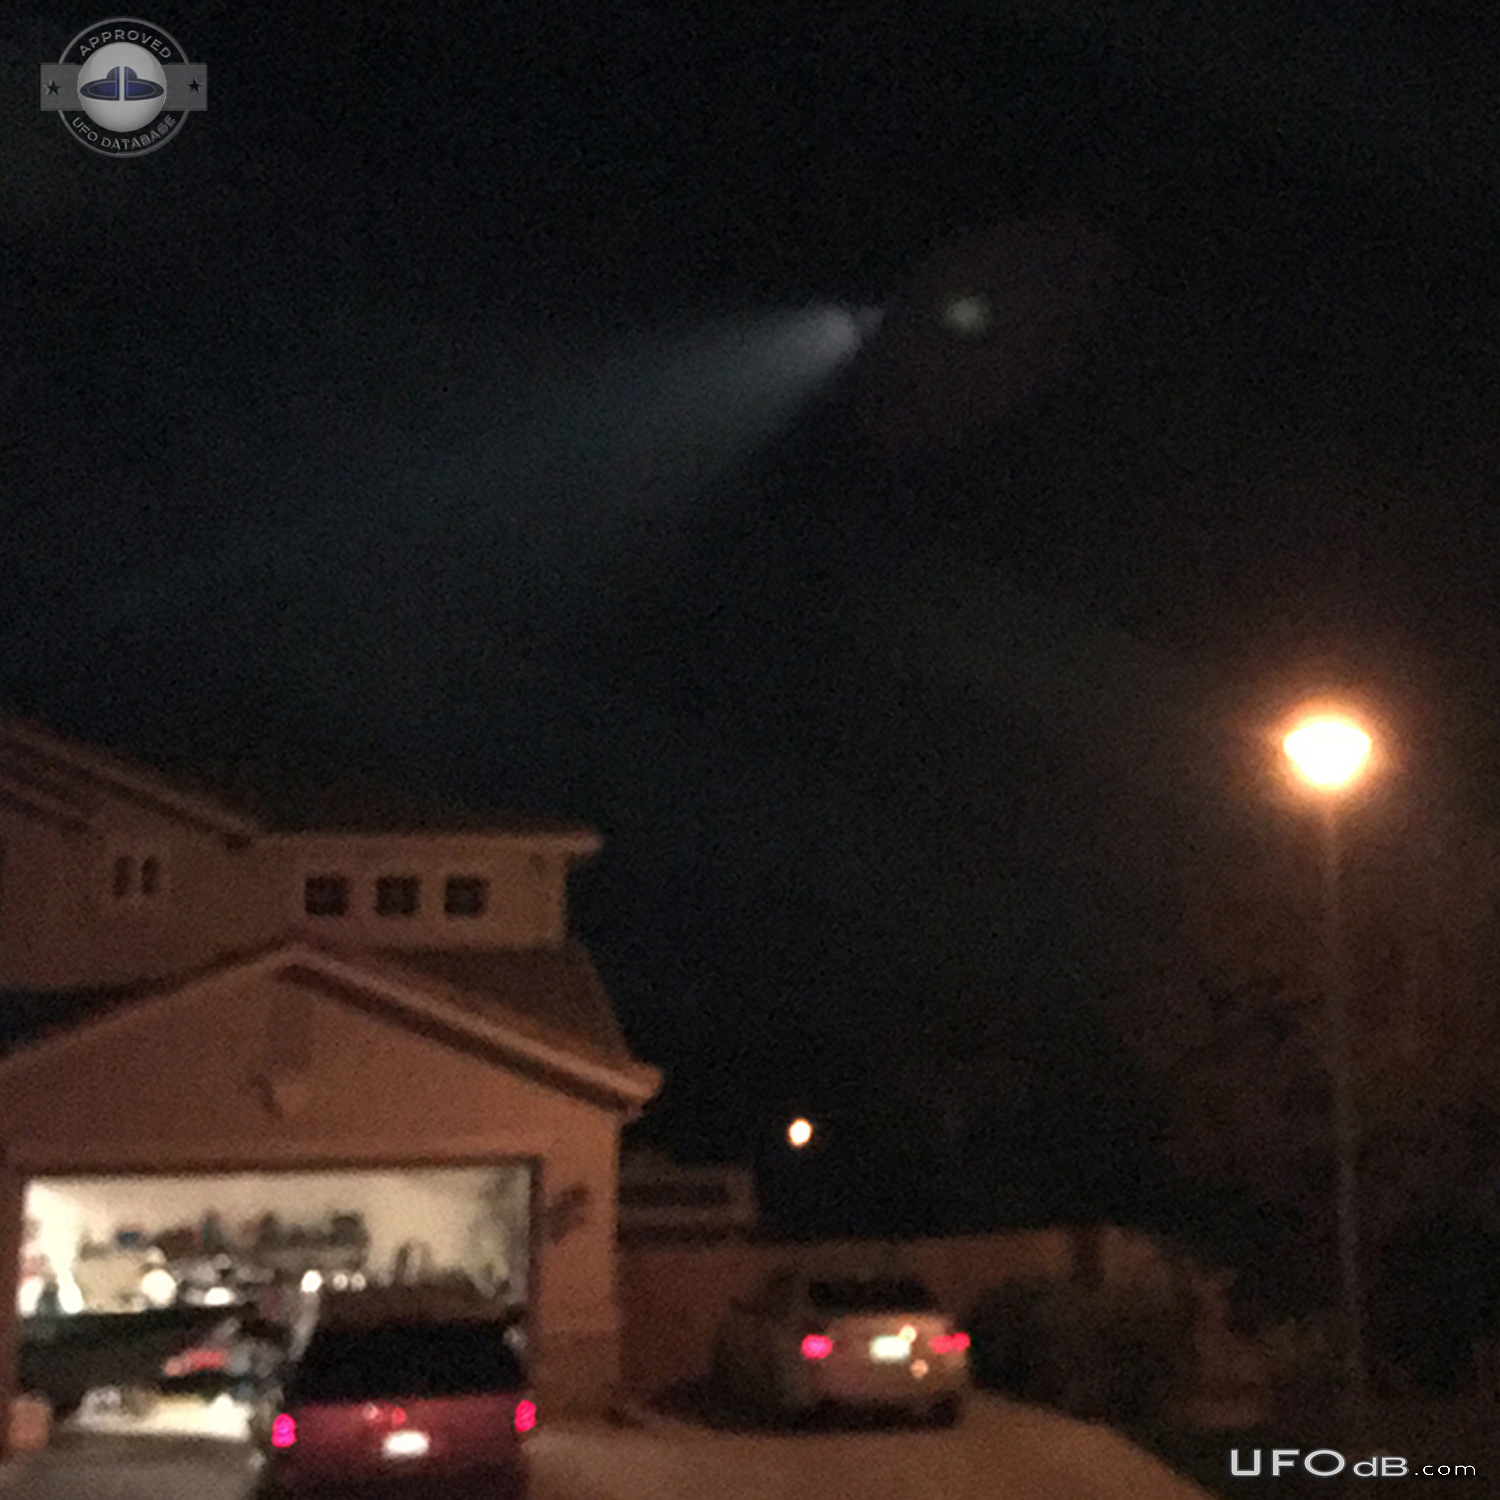 Coming out of my house saw UFO in the sky with a long beam of light -  UFO Picture #758-2